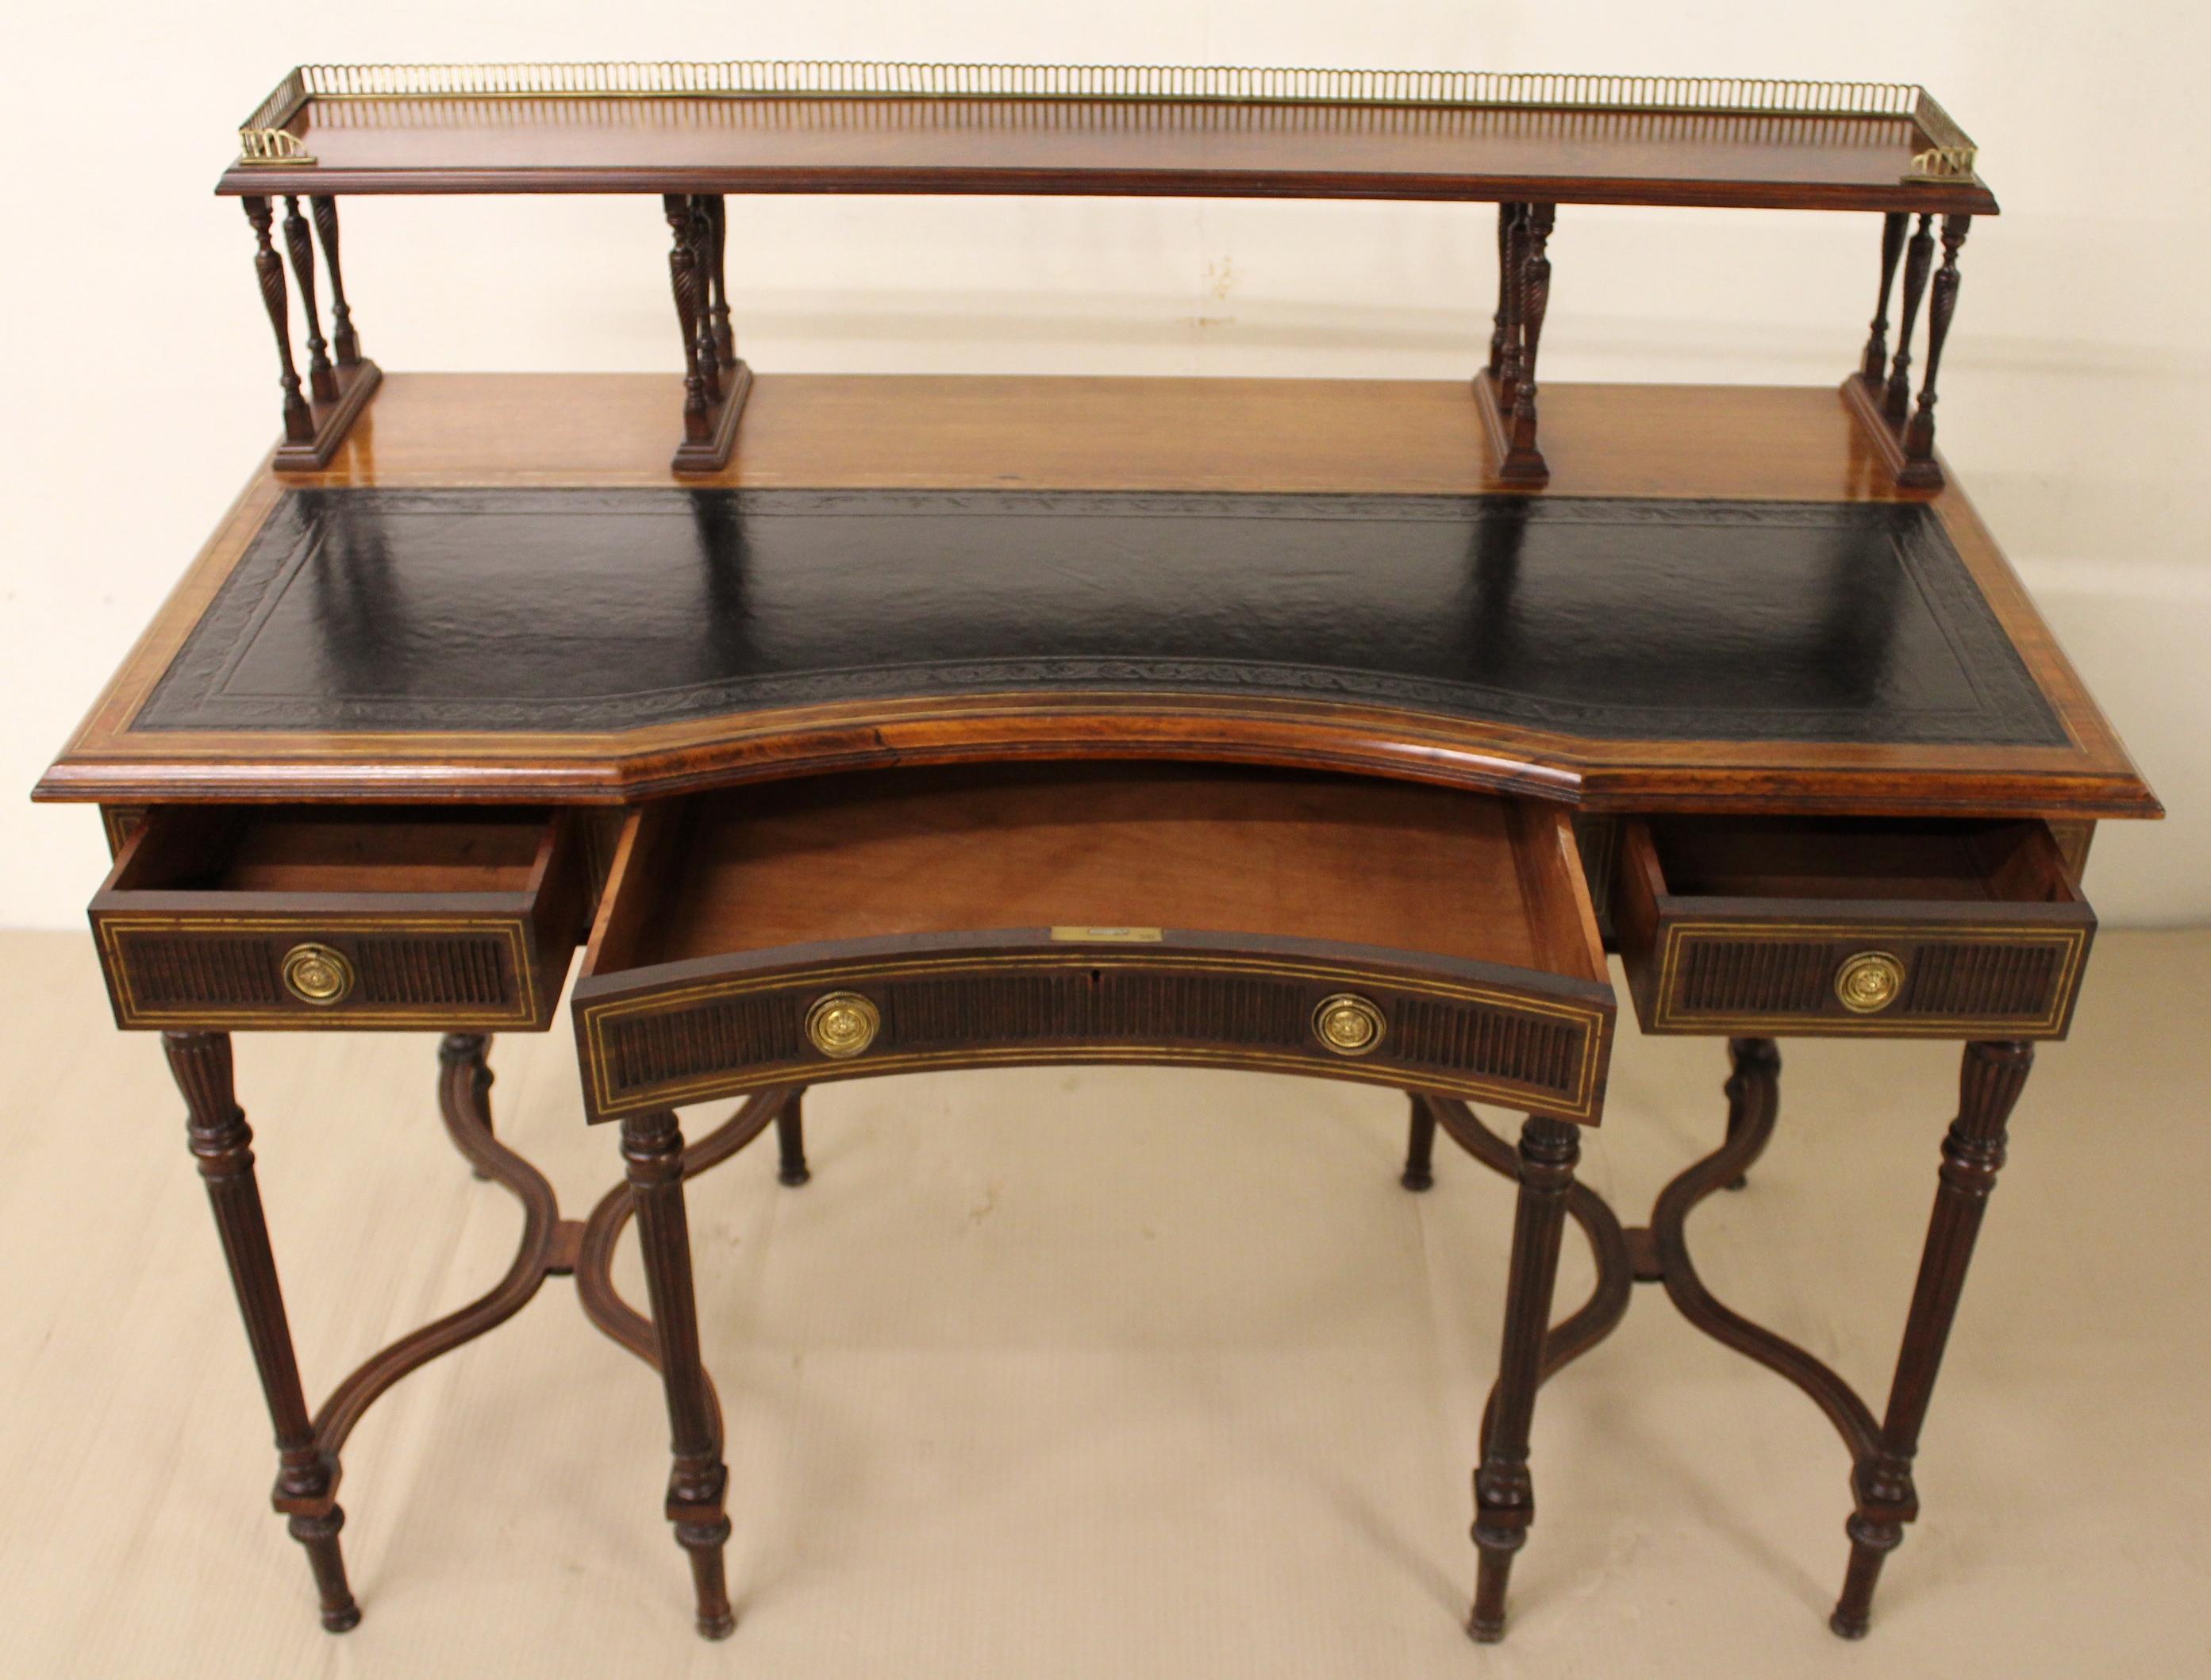 Late 19th Century Victorian Inlaid Rosewood Writing Desk by Collinson and Lock For Sale 1